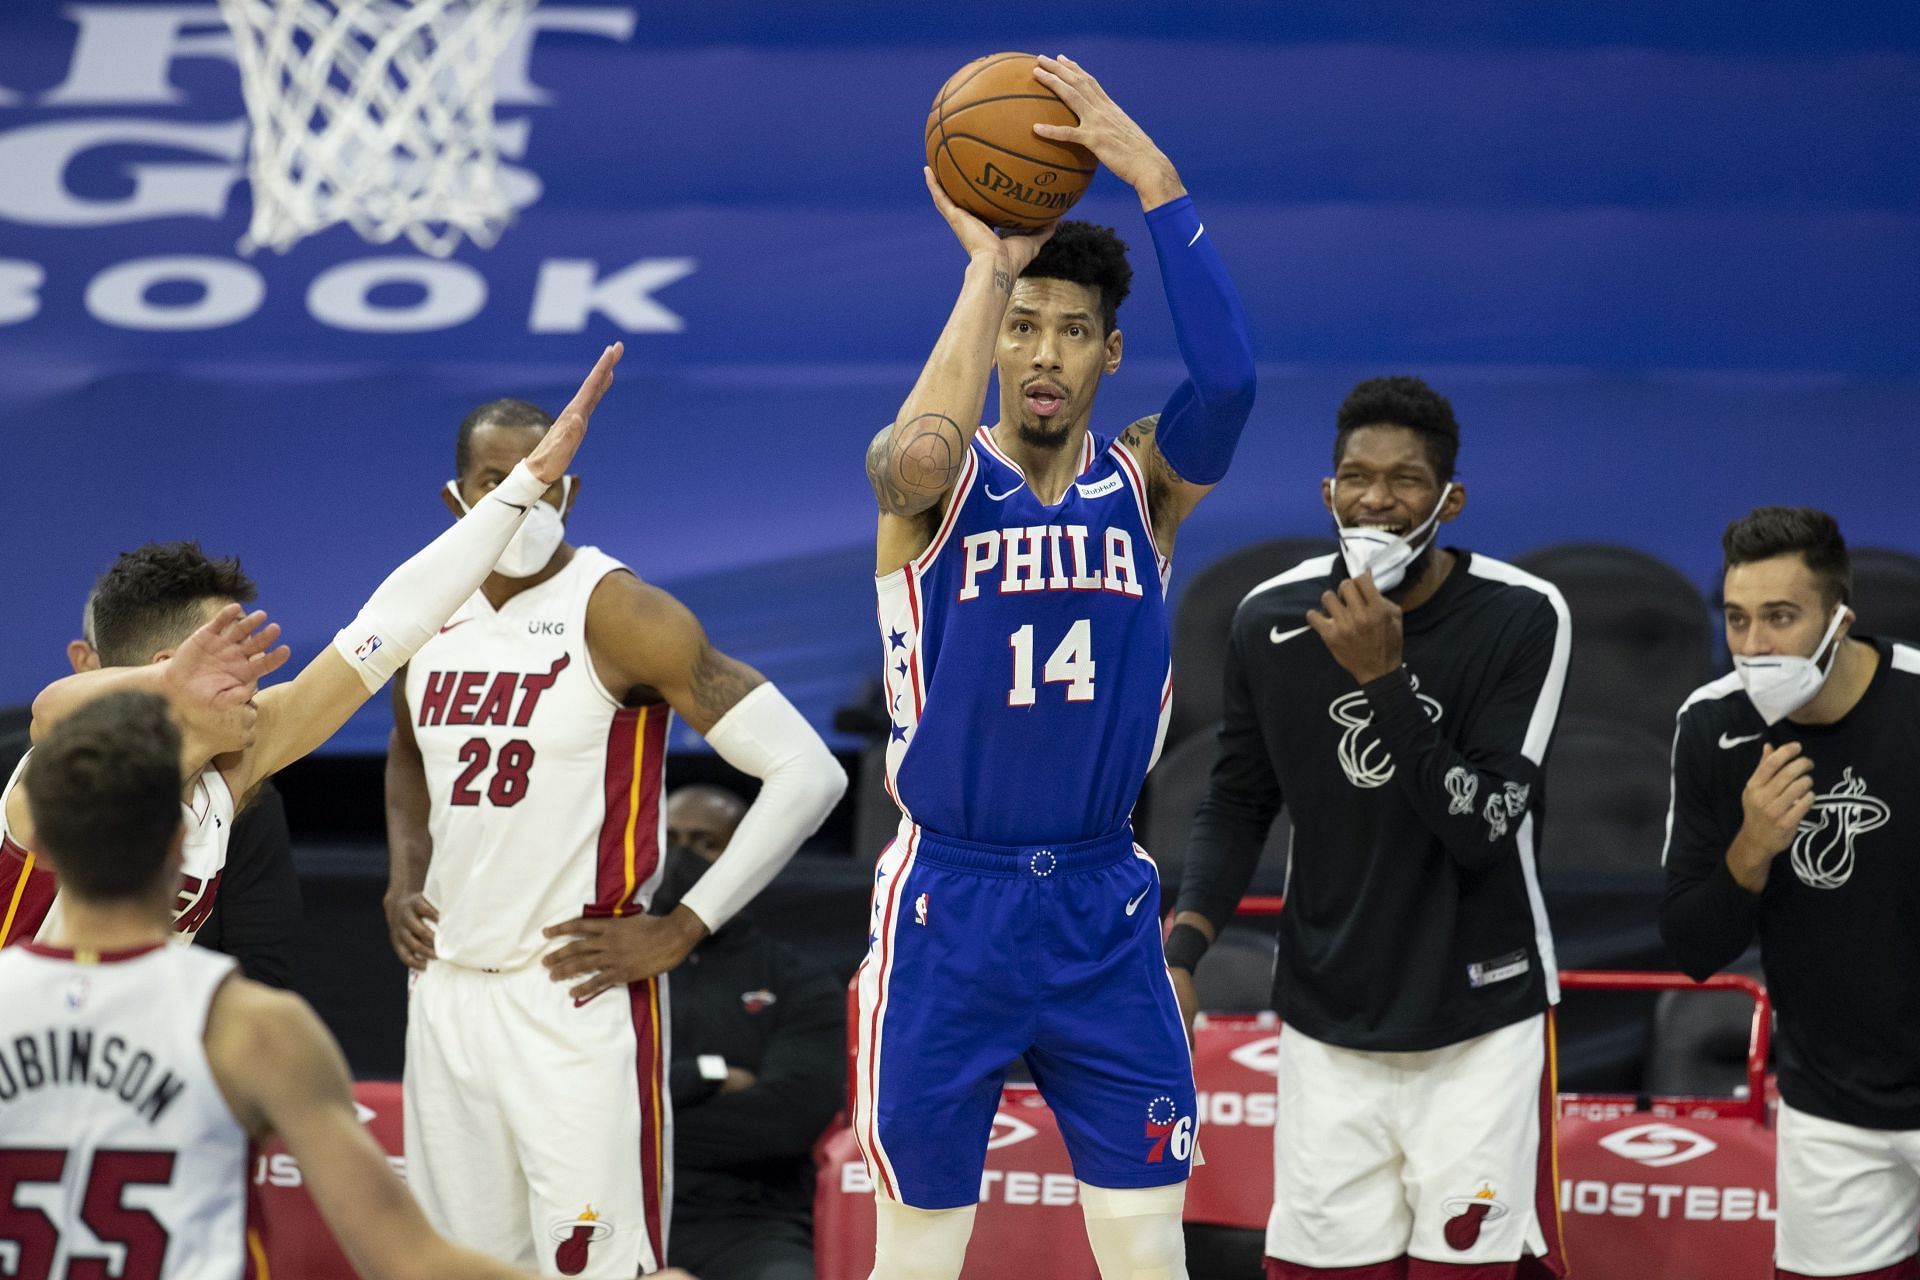 Danny Green #14 of the Philadelphia 76ers shoots the ball in front of the Miami Heat bench in overtime at the Wells Fargo Center on January 12, 2021 in Philadelphia, Pennsylvania. The 76ers defeated the Heat 137-134.